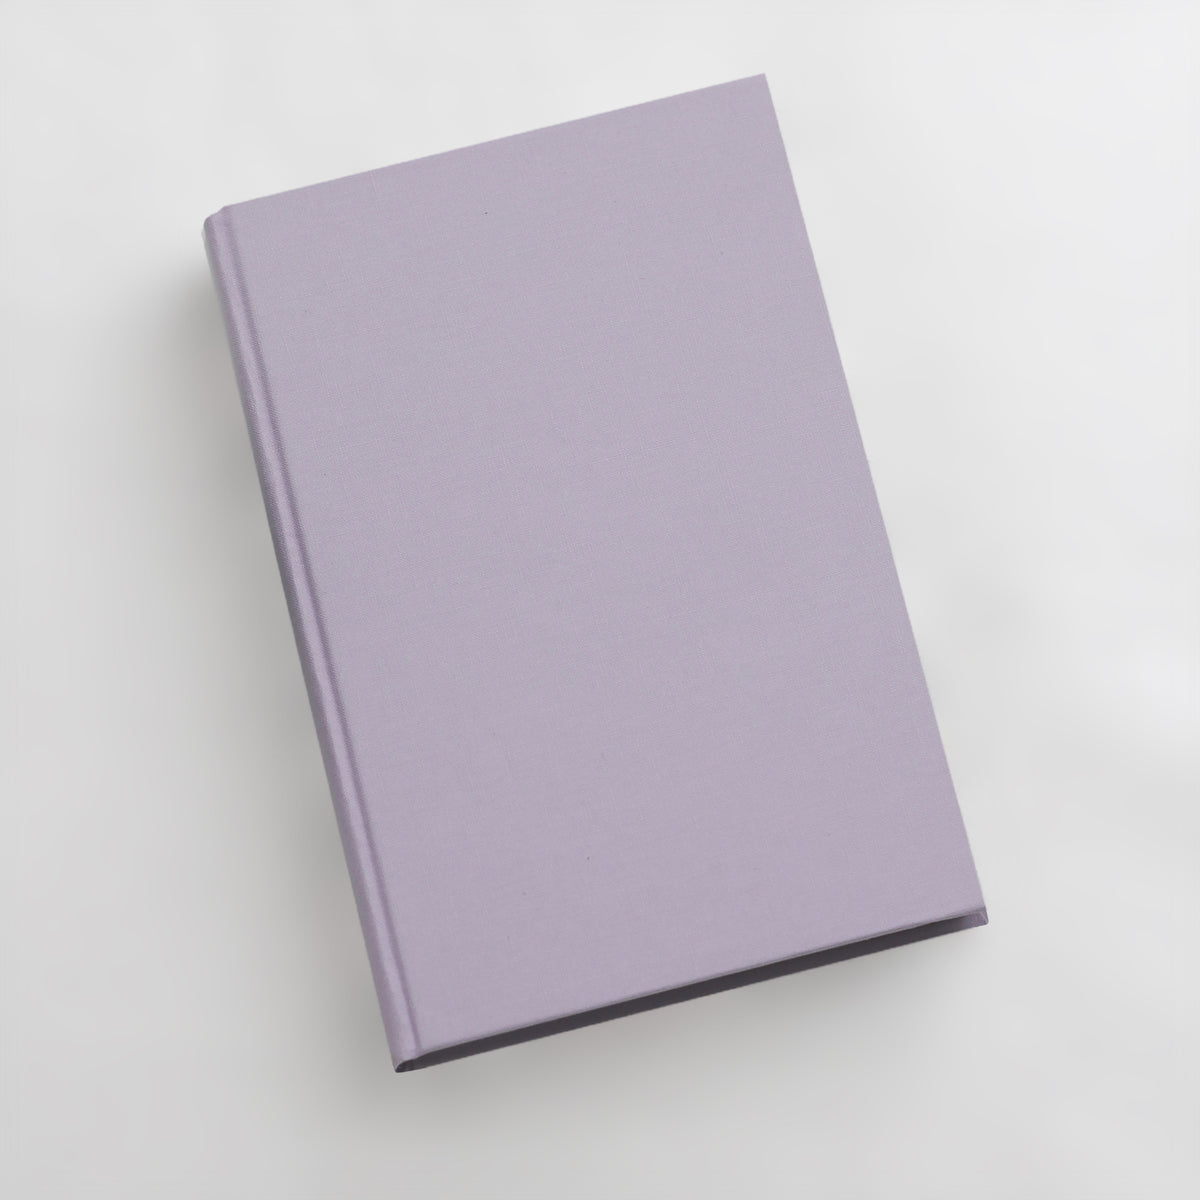 Medium 5.5x8.5 Blank Page Journal | Cover: Lavender Cotton | Available Personalized